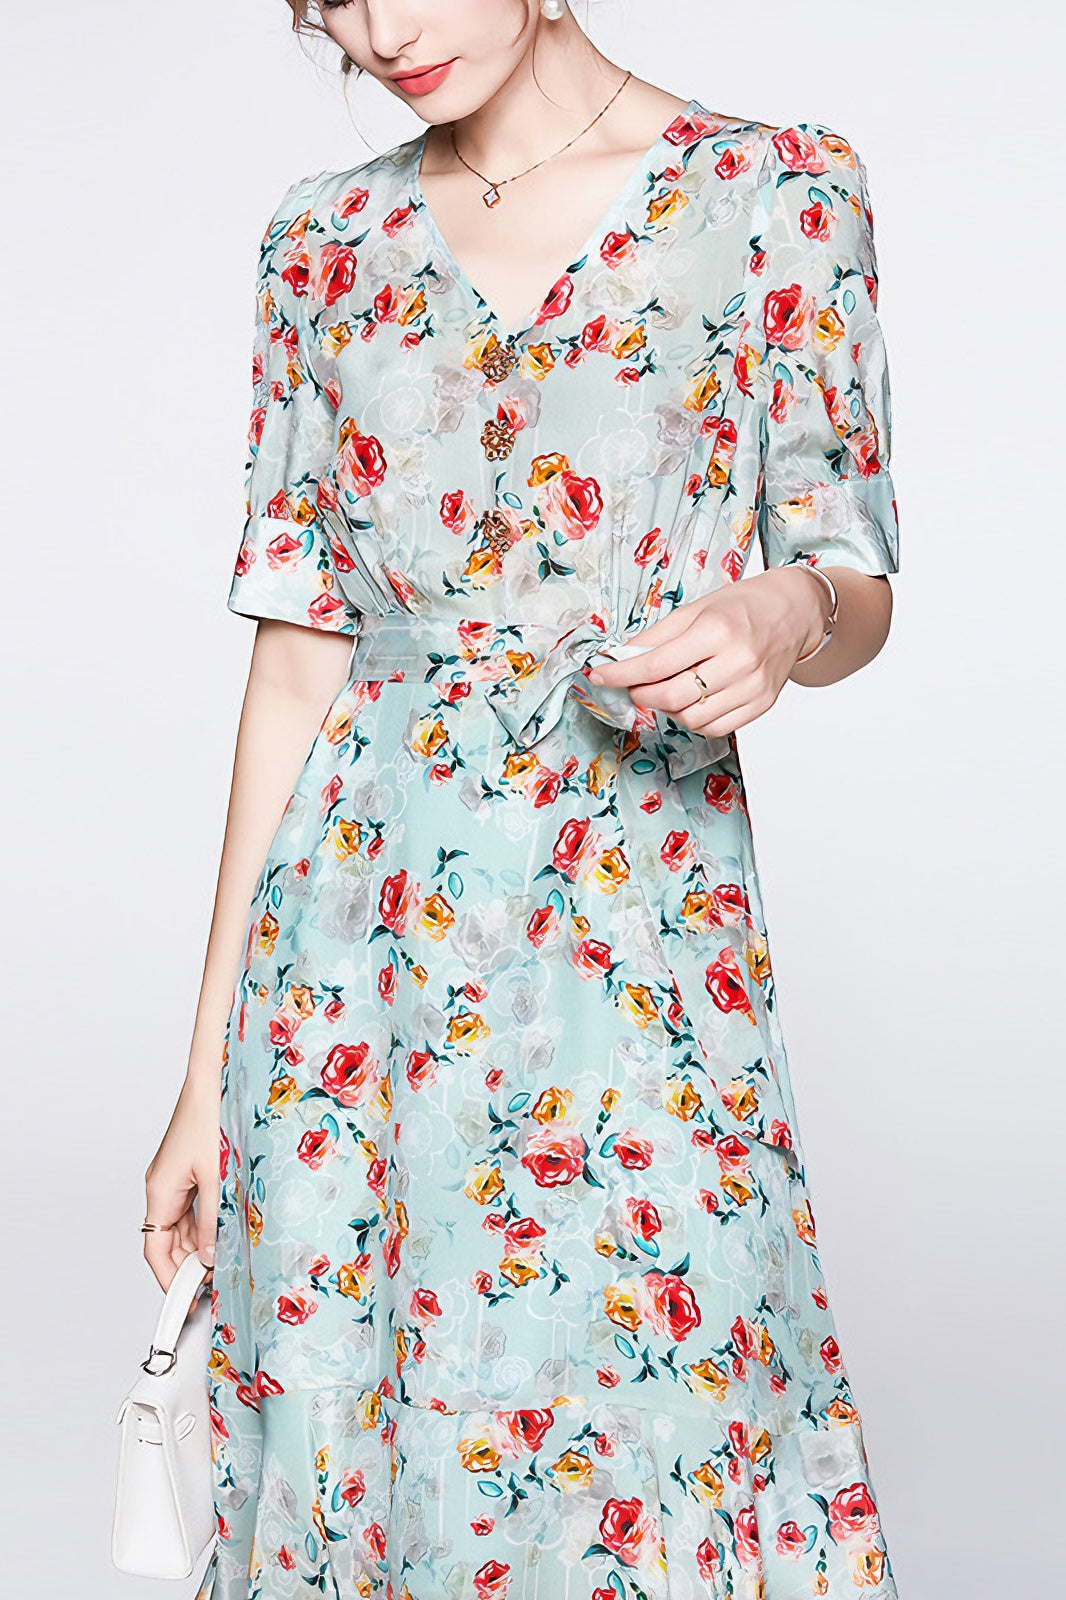 Sisakphoto™-French style new floral dress